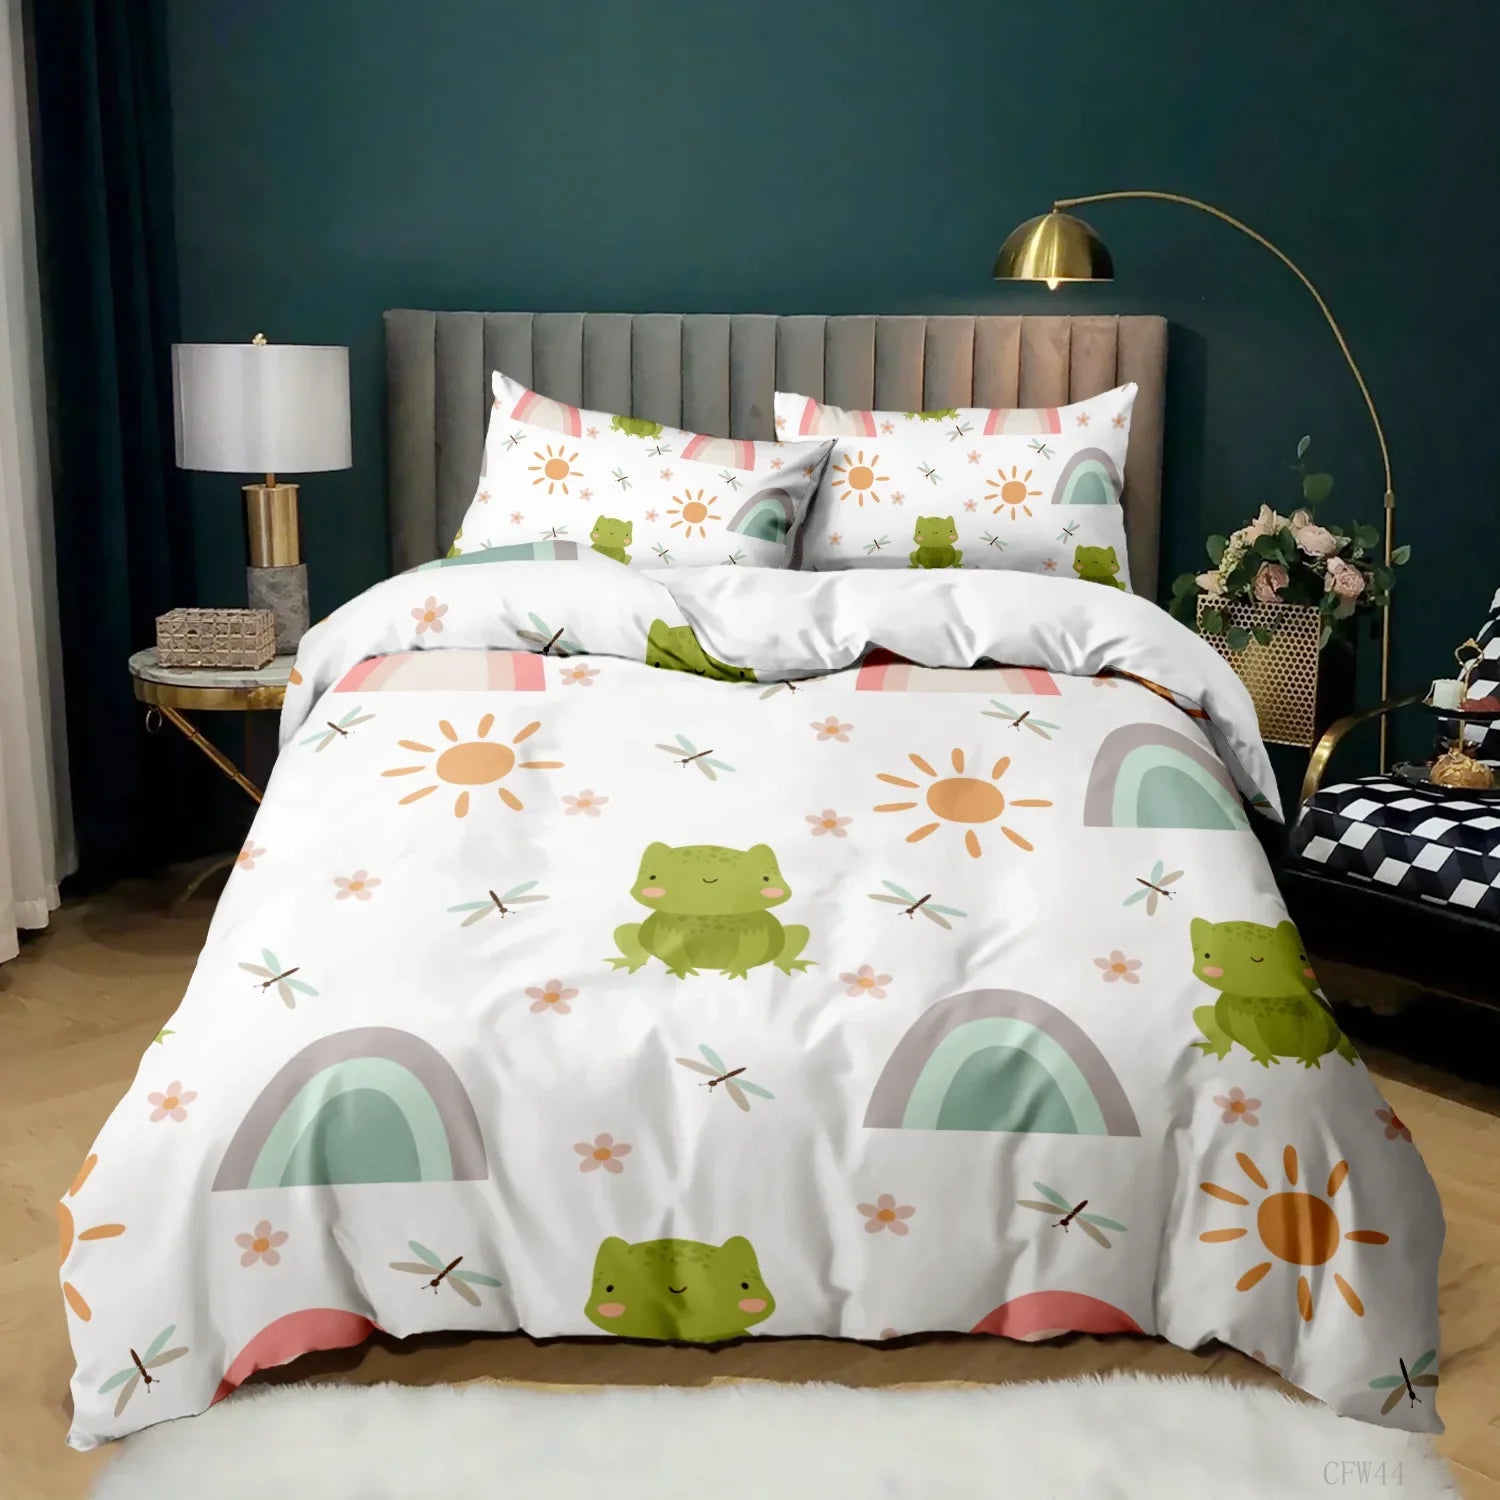 Cartoon Frog Duvet Cover Set Light Green Cartoon Frogs Cute Dragonfly Animal Bedding Set for Kid Twin Size Polyester Quilt Cover